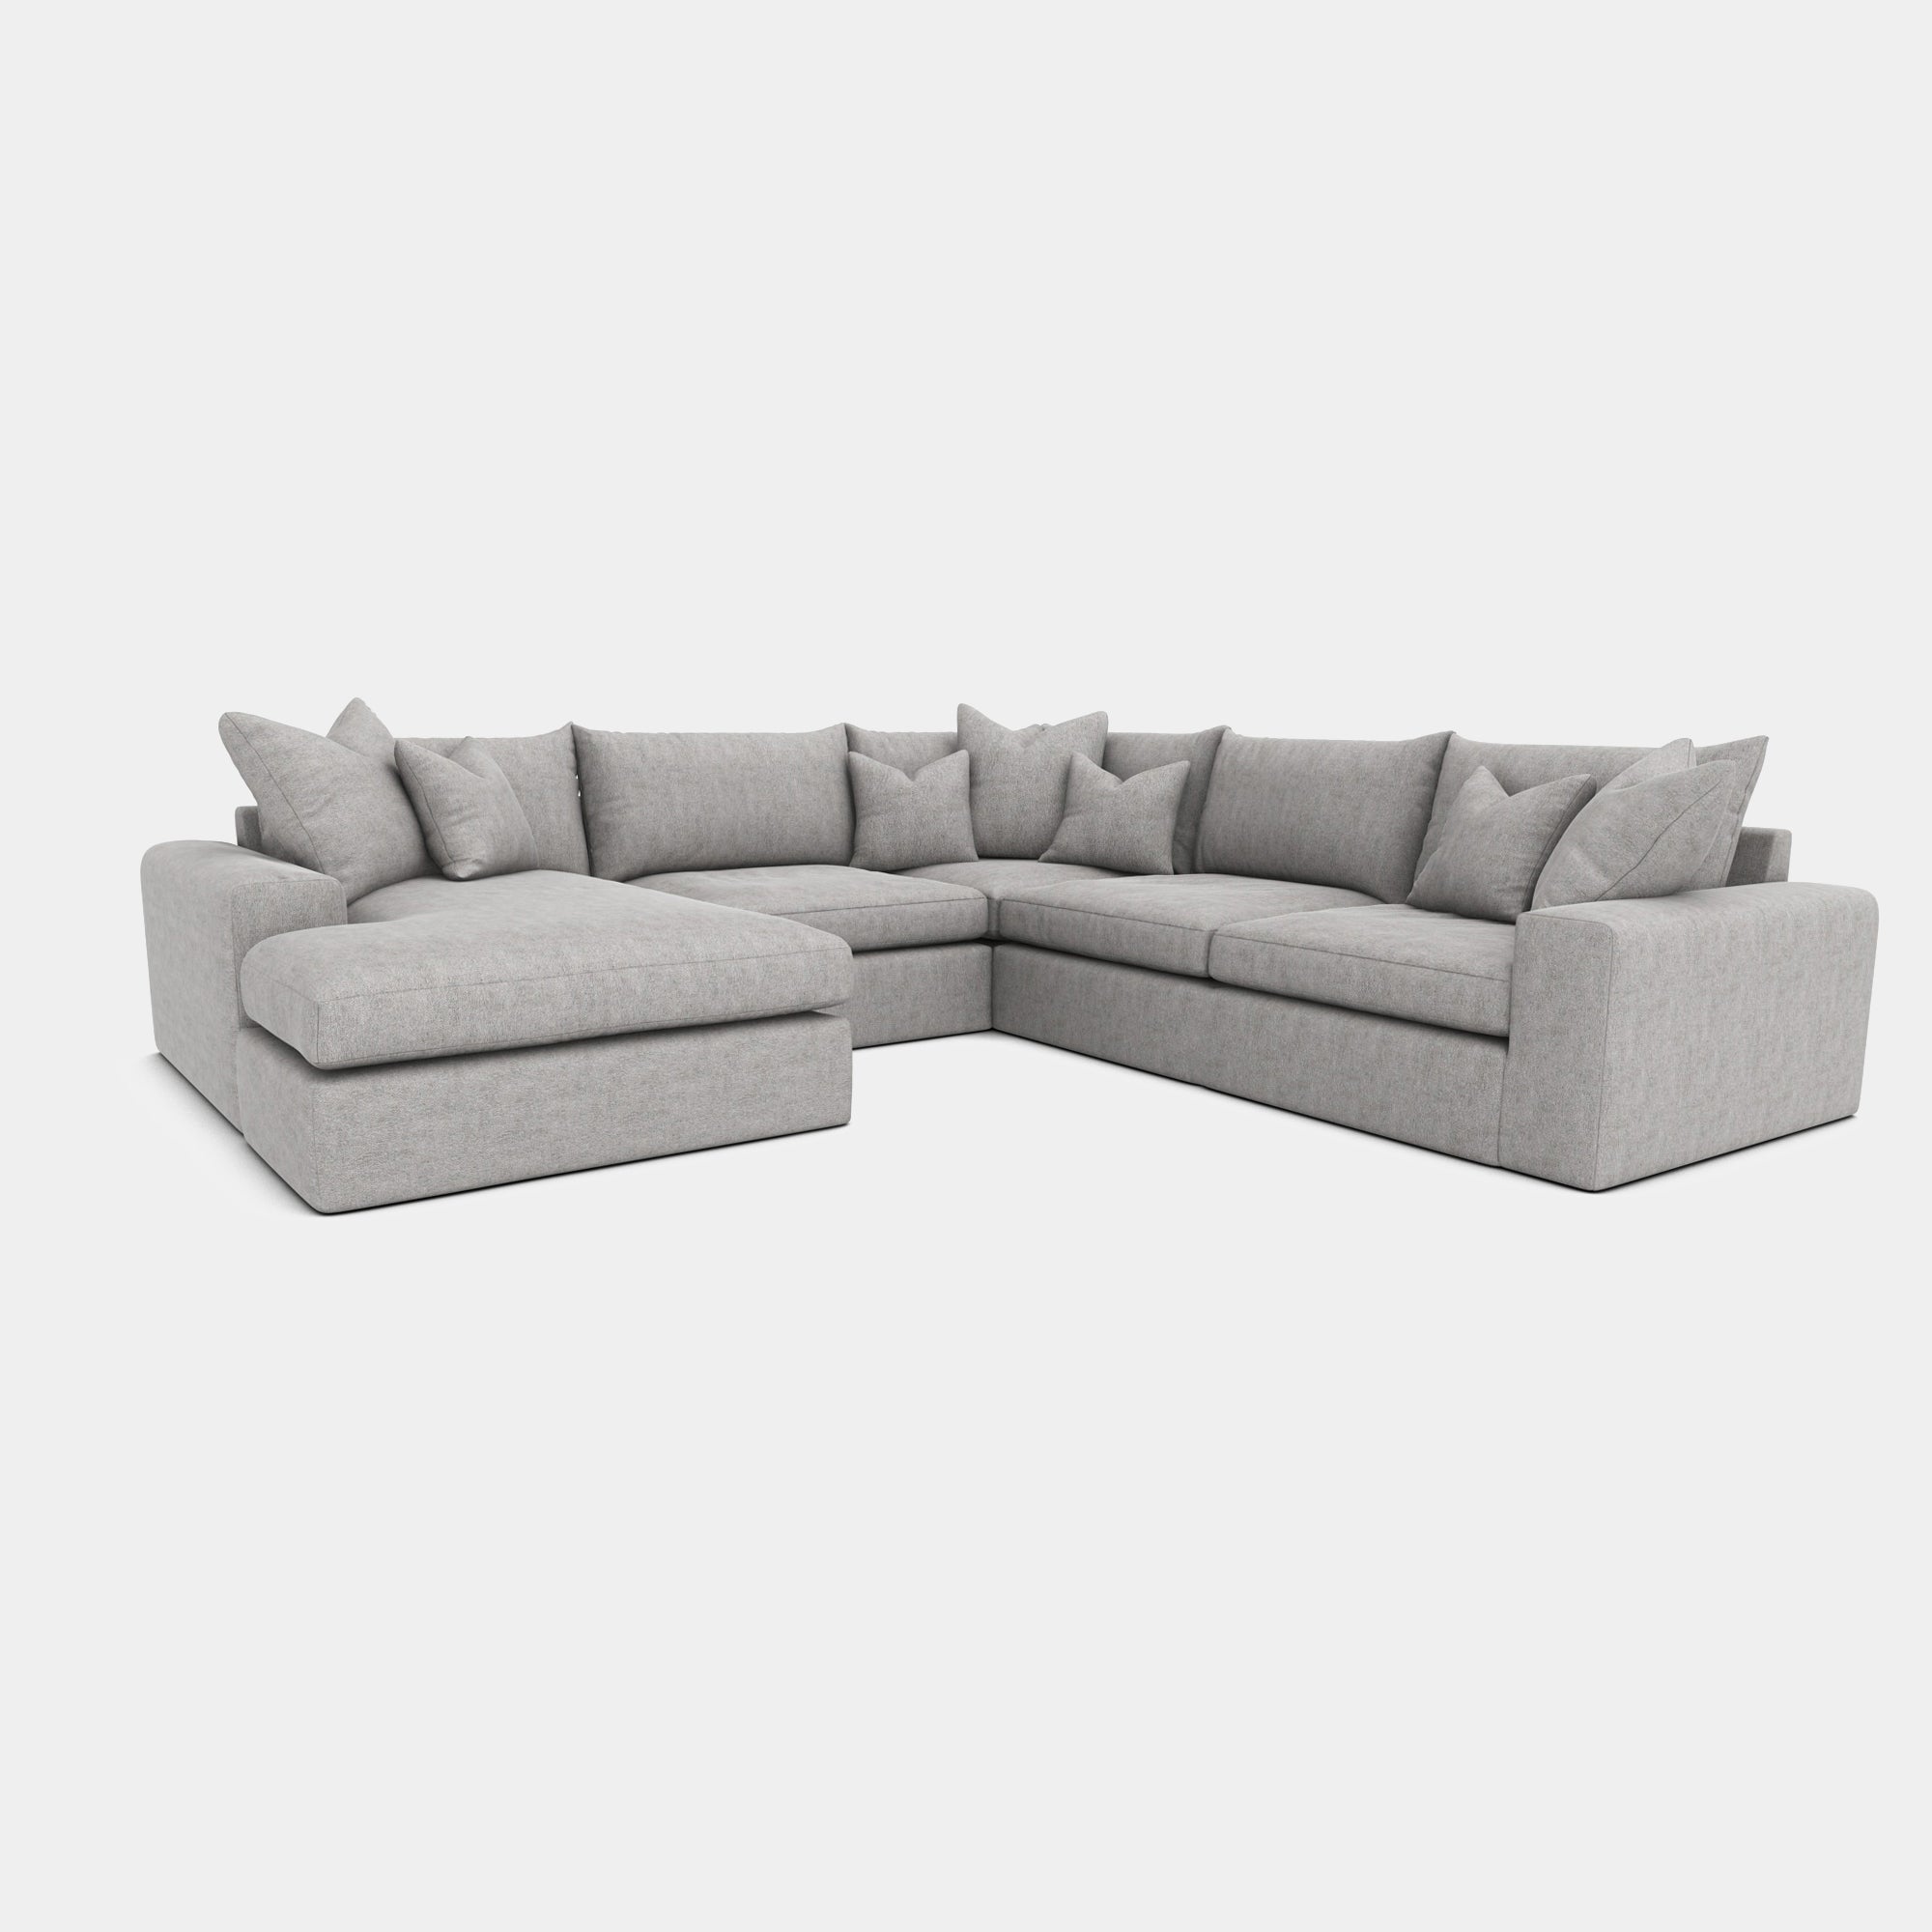 Sapphire - Corner Group RHF 2 Seat Sofa With LHF Chaise In Fabric Grade C